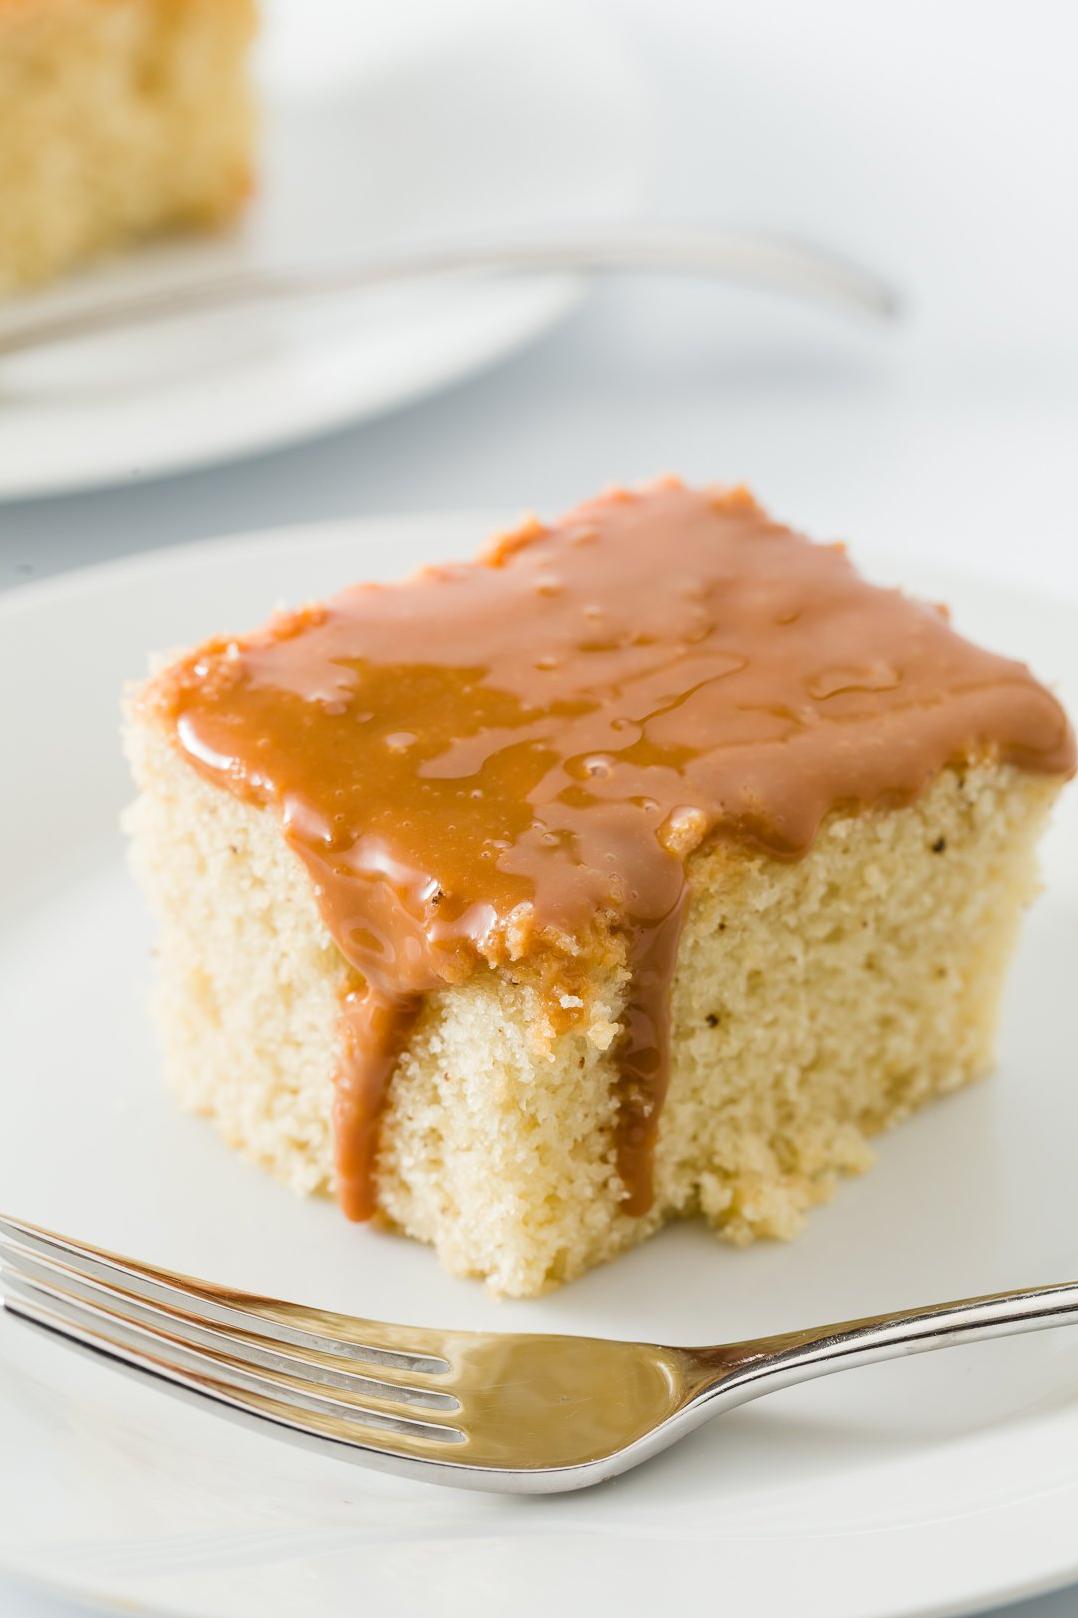  A perfect blend of rich caramel mousse and airy sponge cake layers.